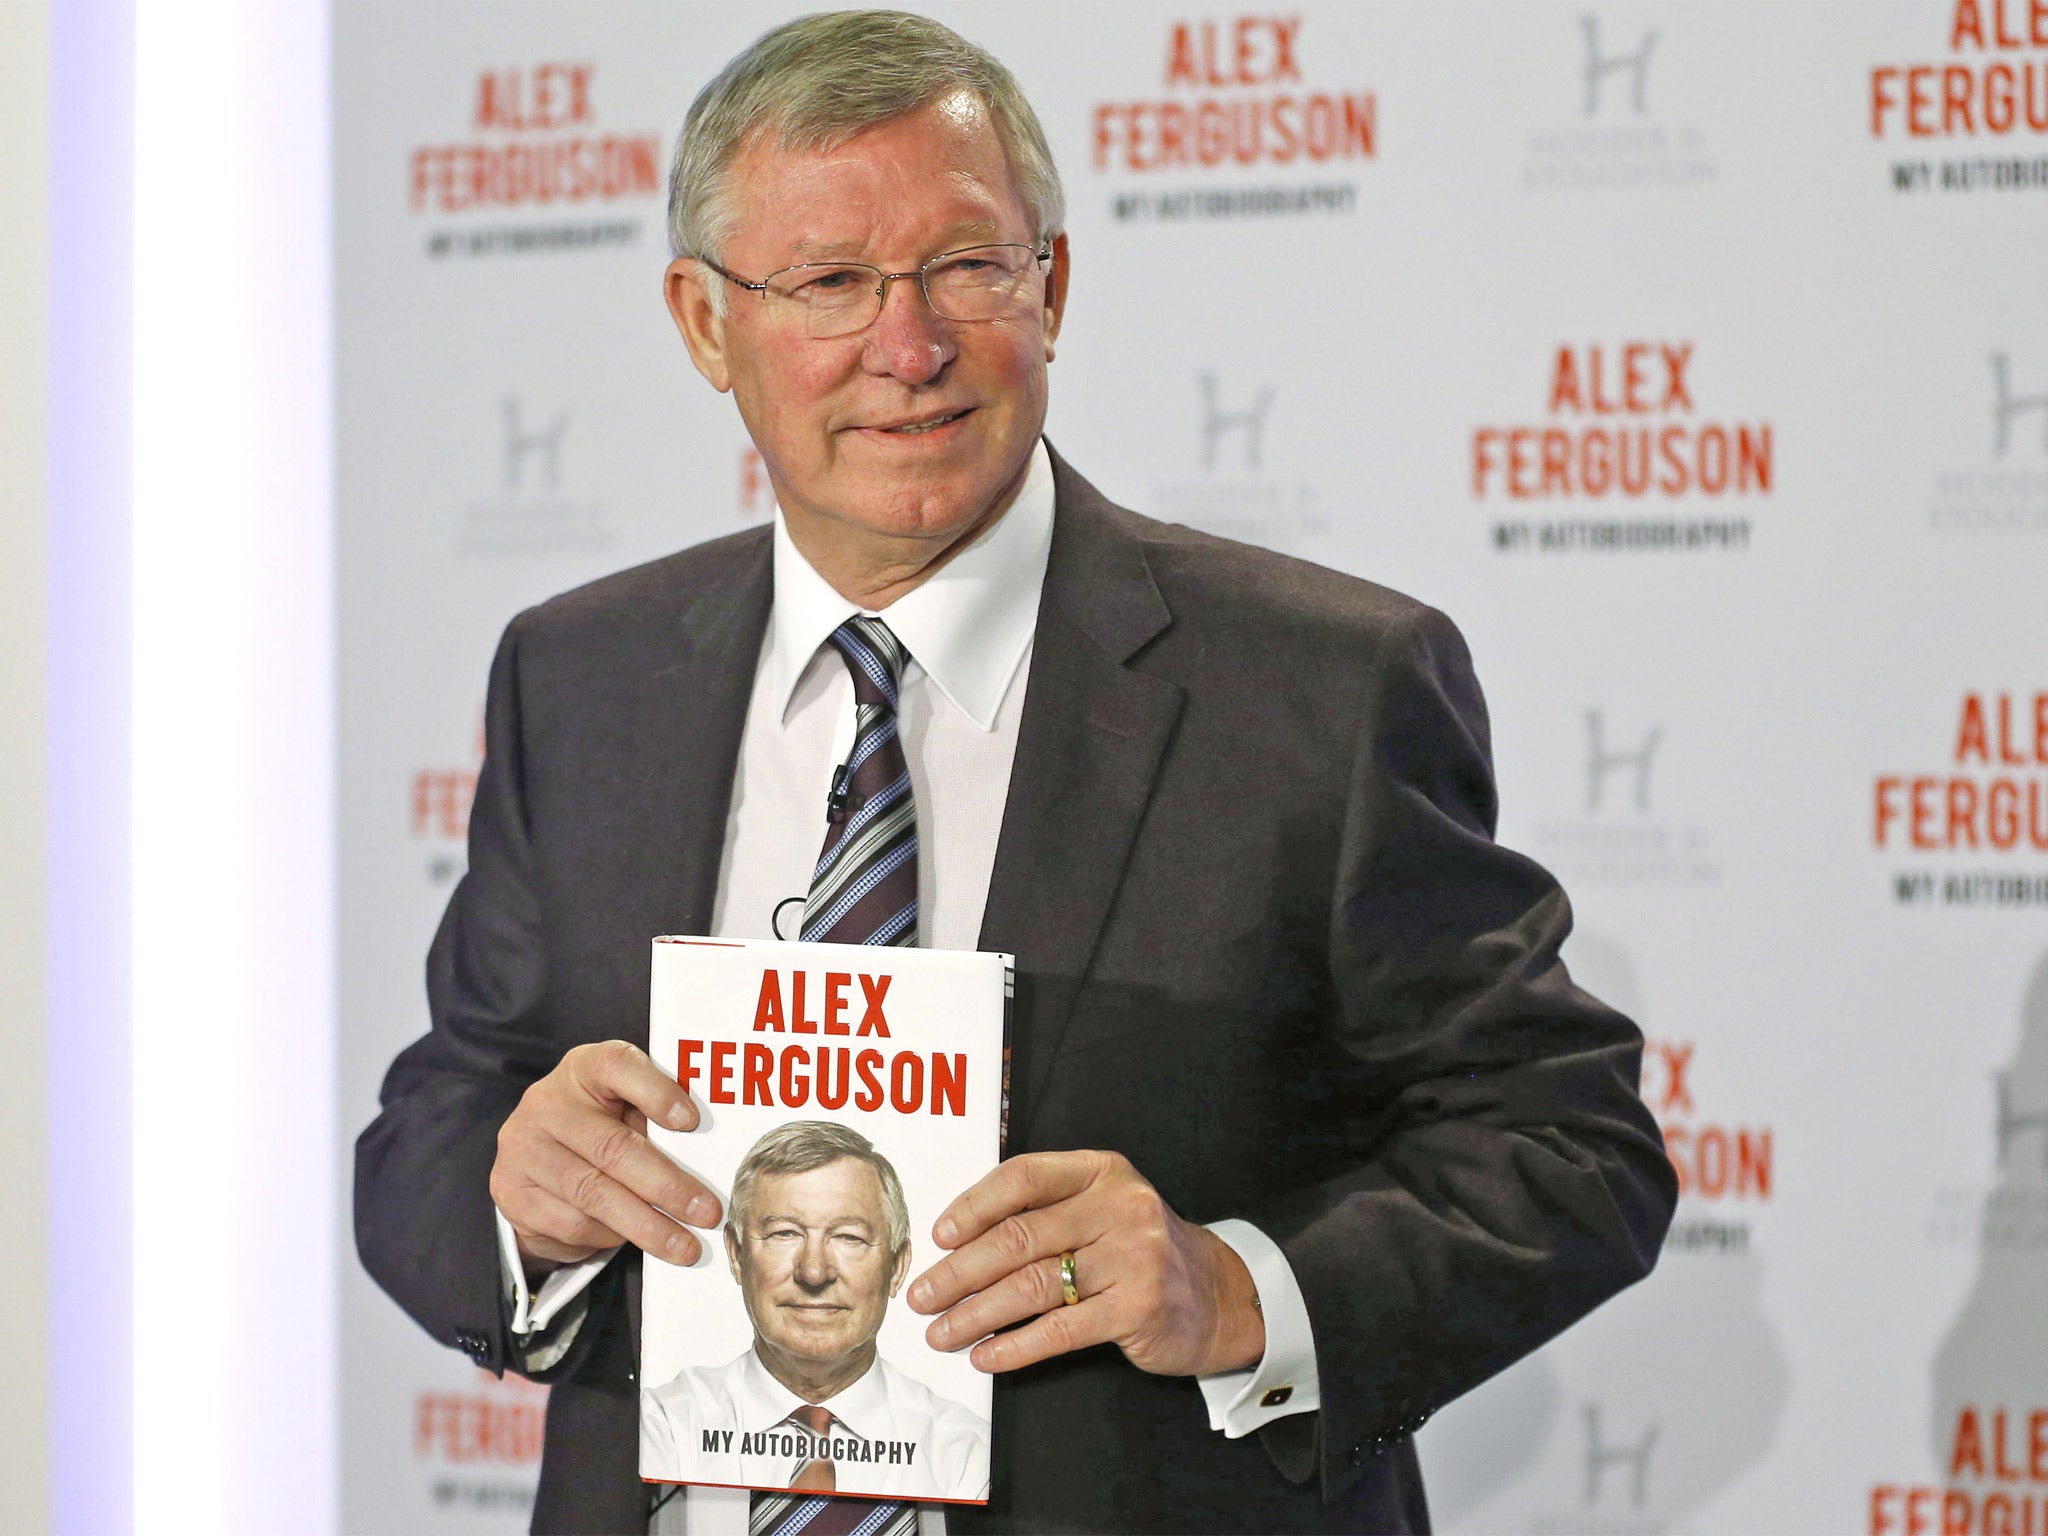 Sir Alex Ferguson during the launch of his autobiography in London